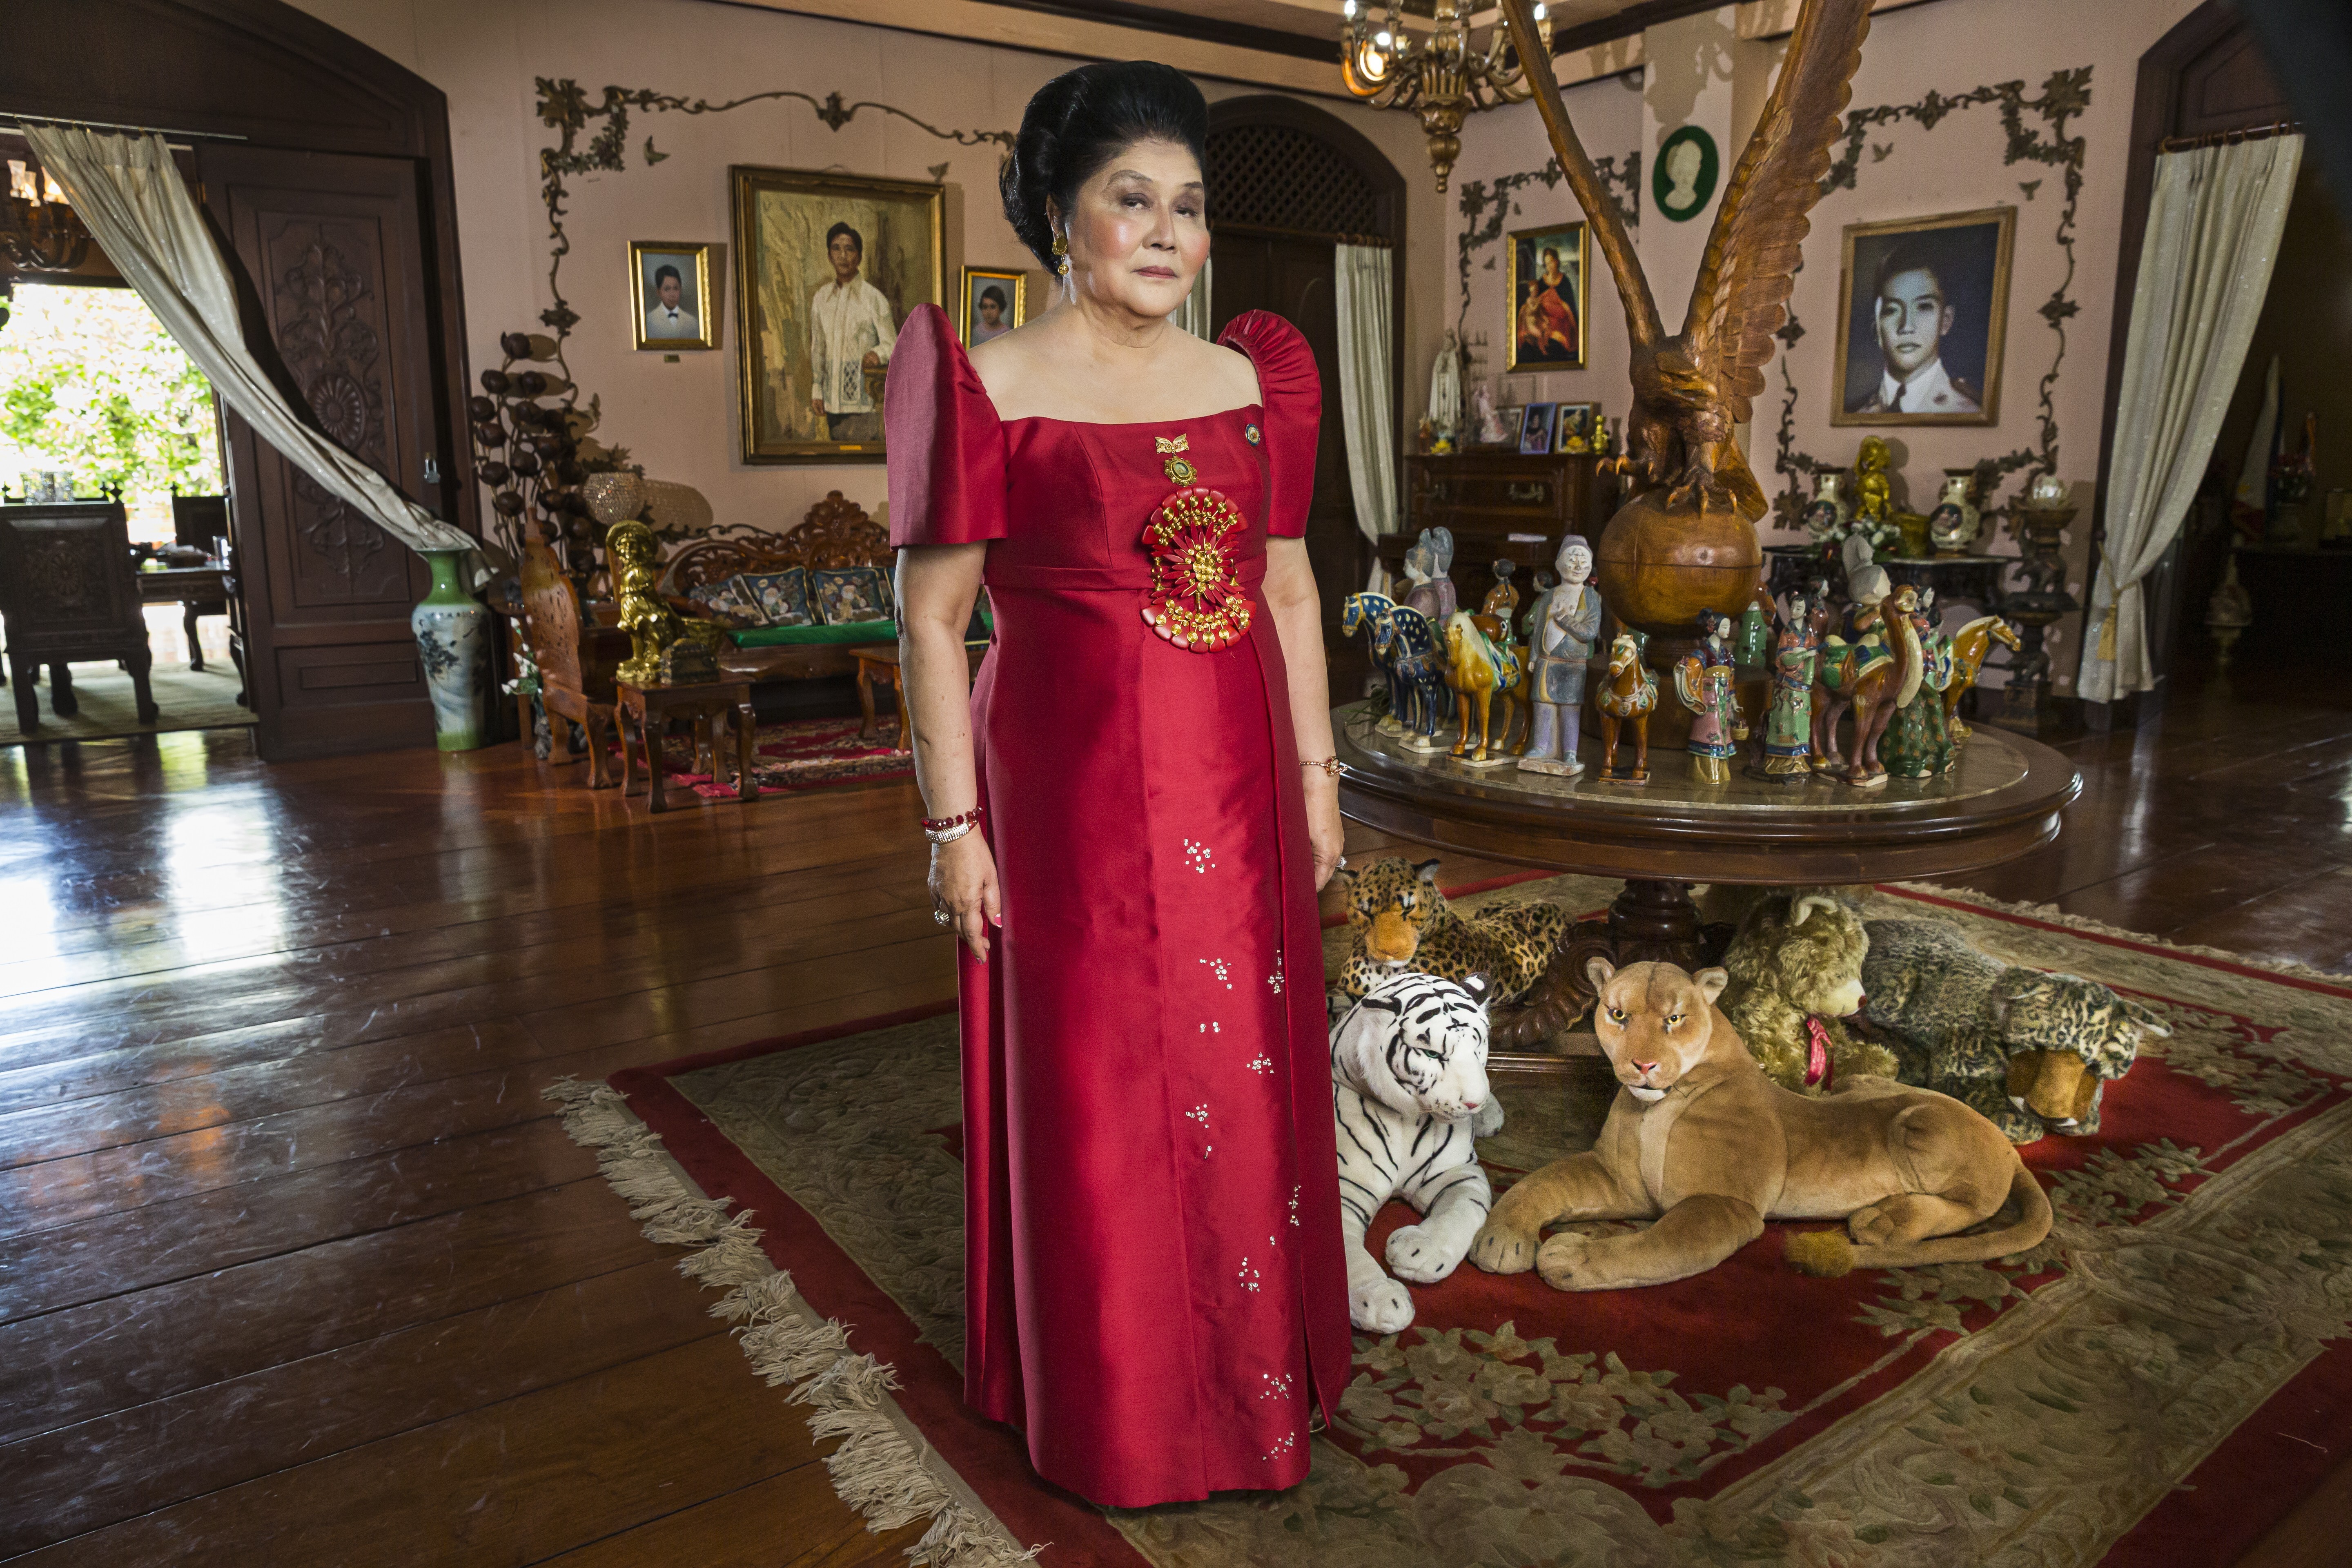 Imelda Marcos on her 85th birthday in a still from The Kingmaker. Photo: Lauren Greenfield/The Kingmaker